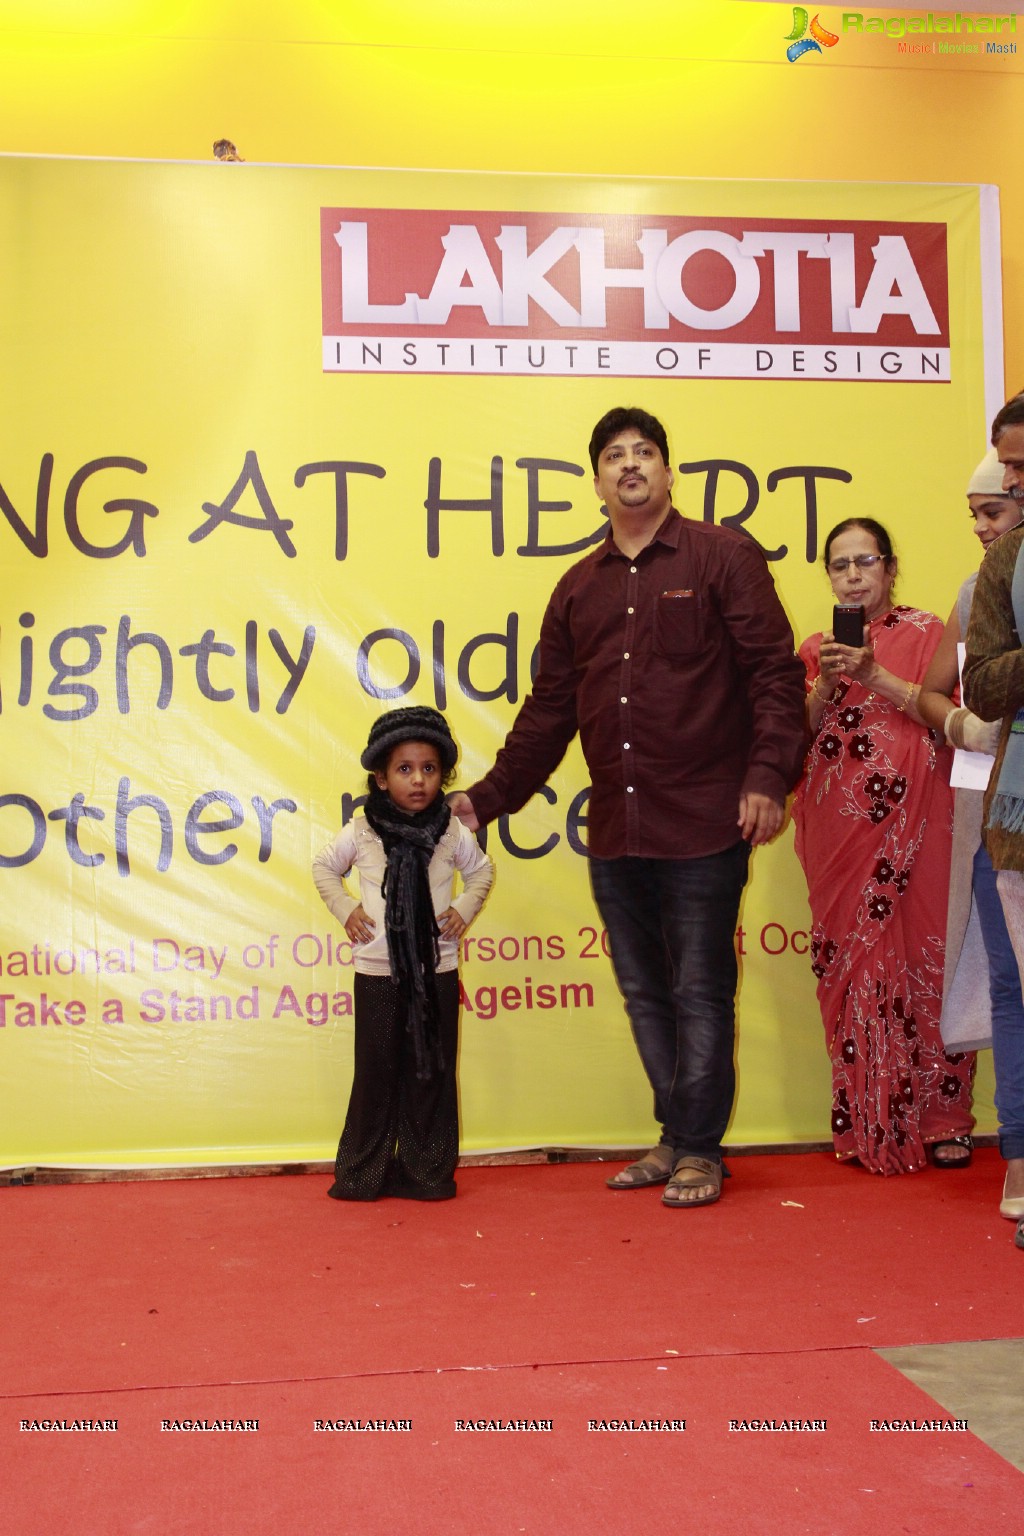 Celebrating International Day of Older Persons 2016 at Lakhotia Institute of Fashion Design (LID)